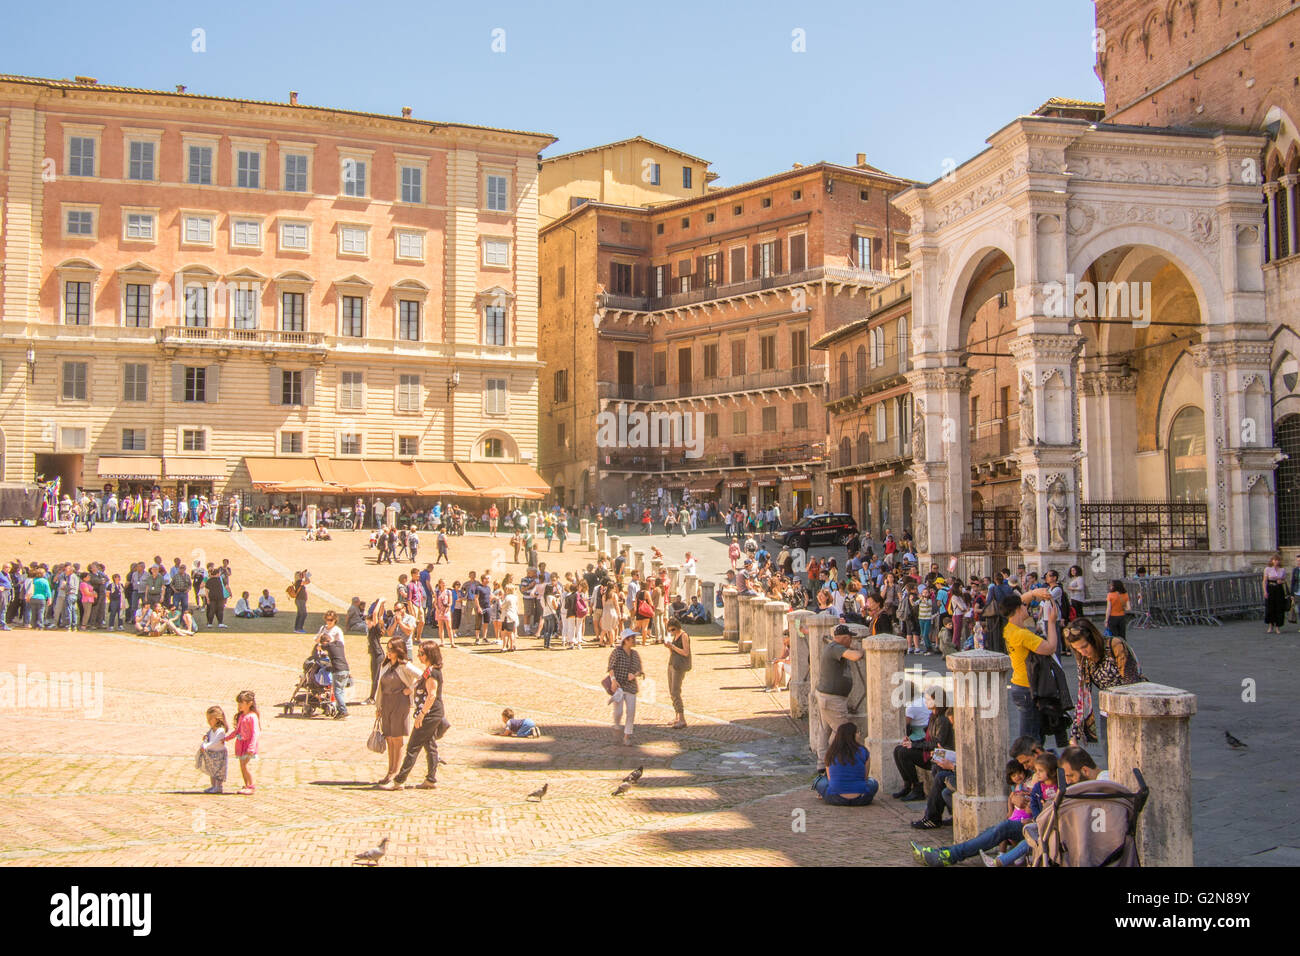 'Il Campo', a medieval Piazza in Siena, Tuscany, Italy Stock Photo